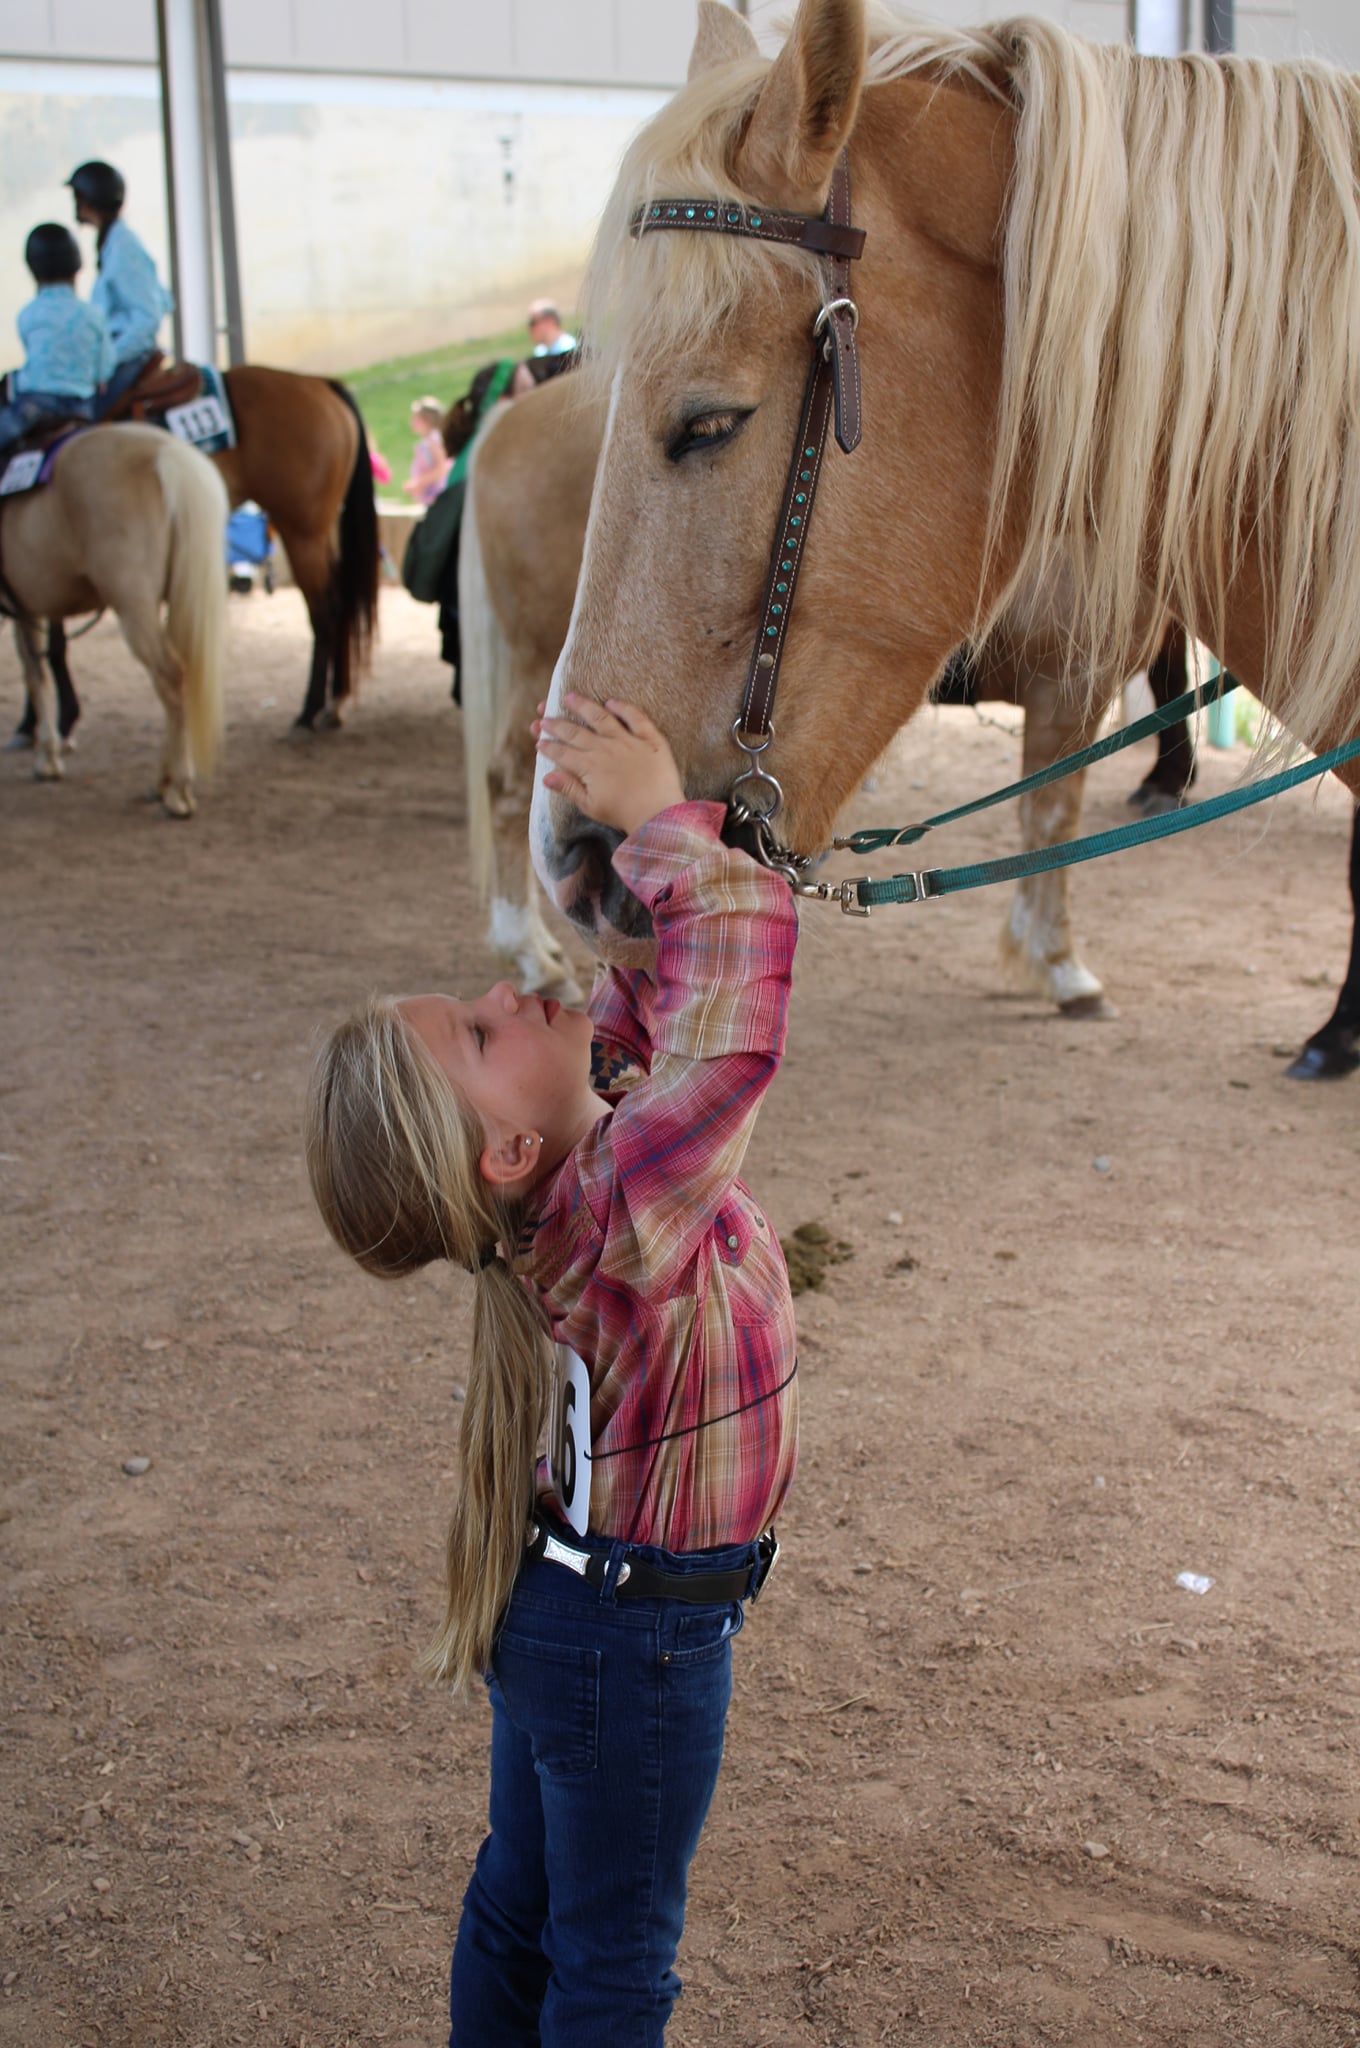 Brooklyn Arney bonds with horse Fabio at the West District 4-H Horse Show on April 30, 2022. The pair participated in Cloverbud classes at the show.